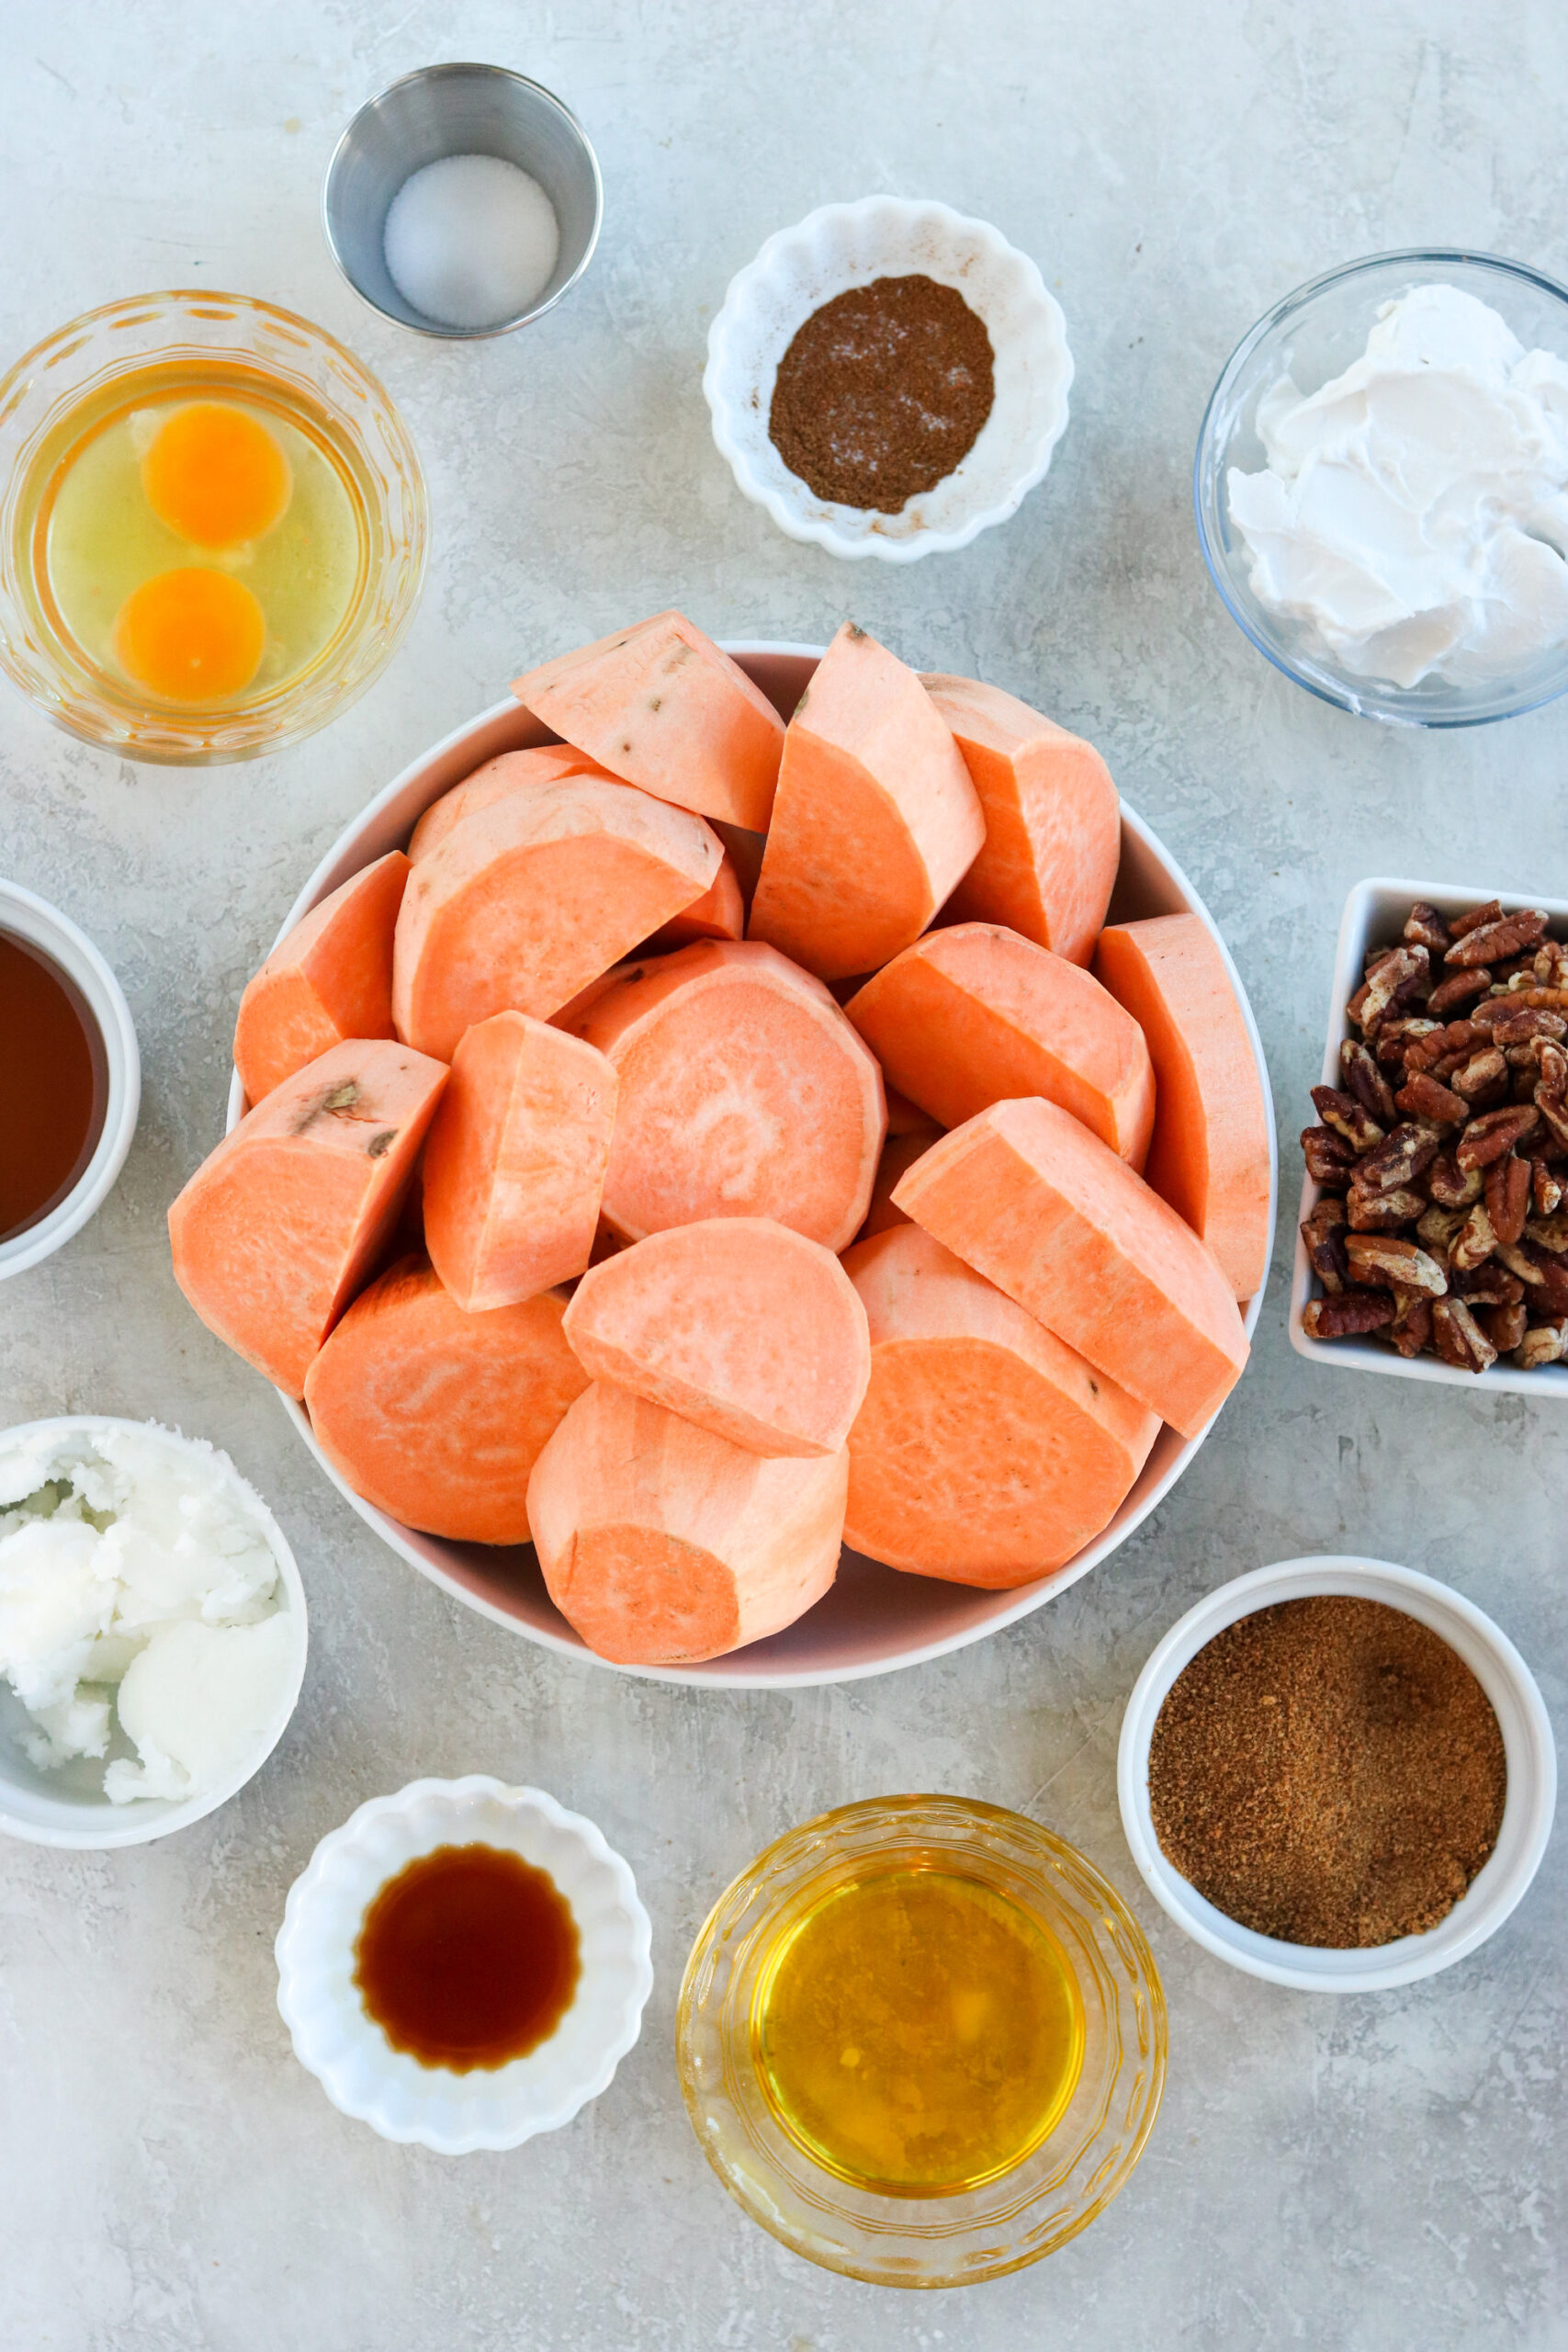 ingredients for the paleo and healthier version of sweet potato casserole